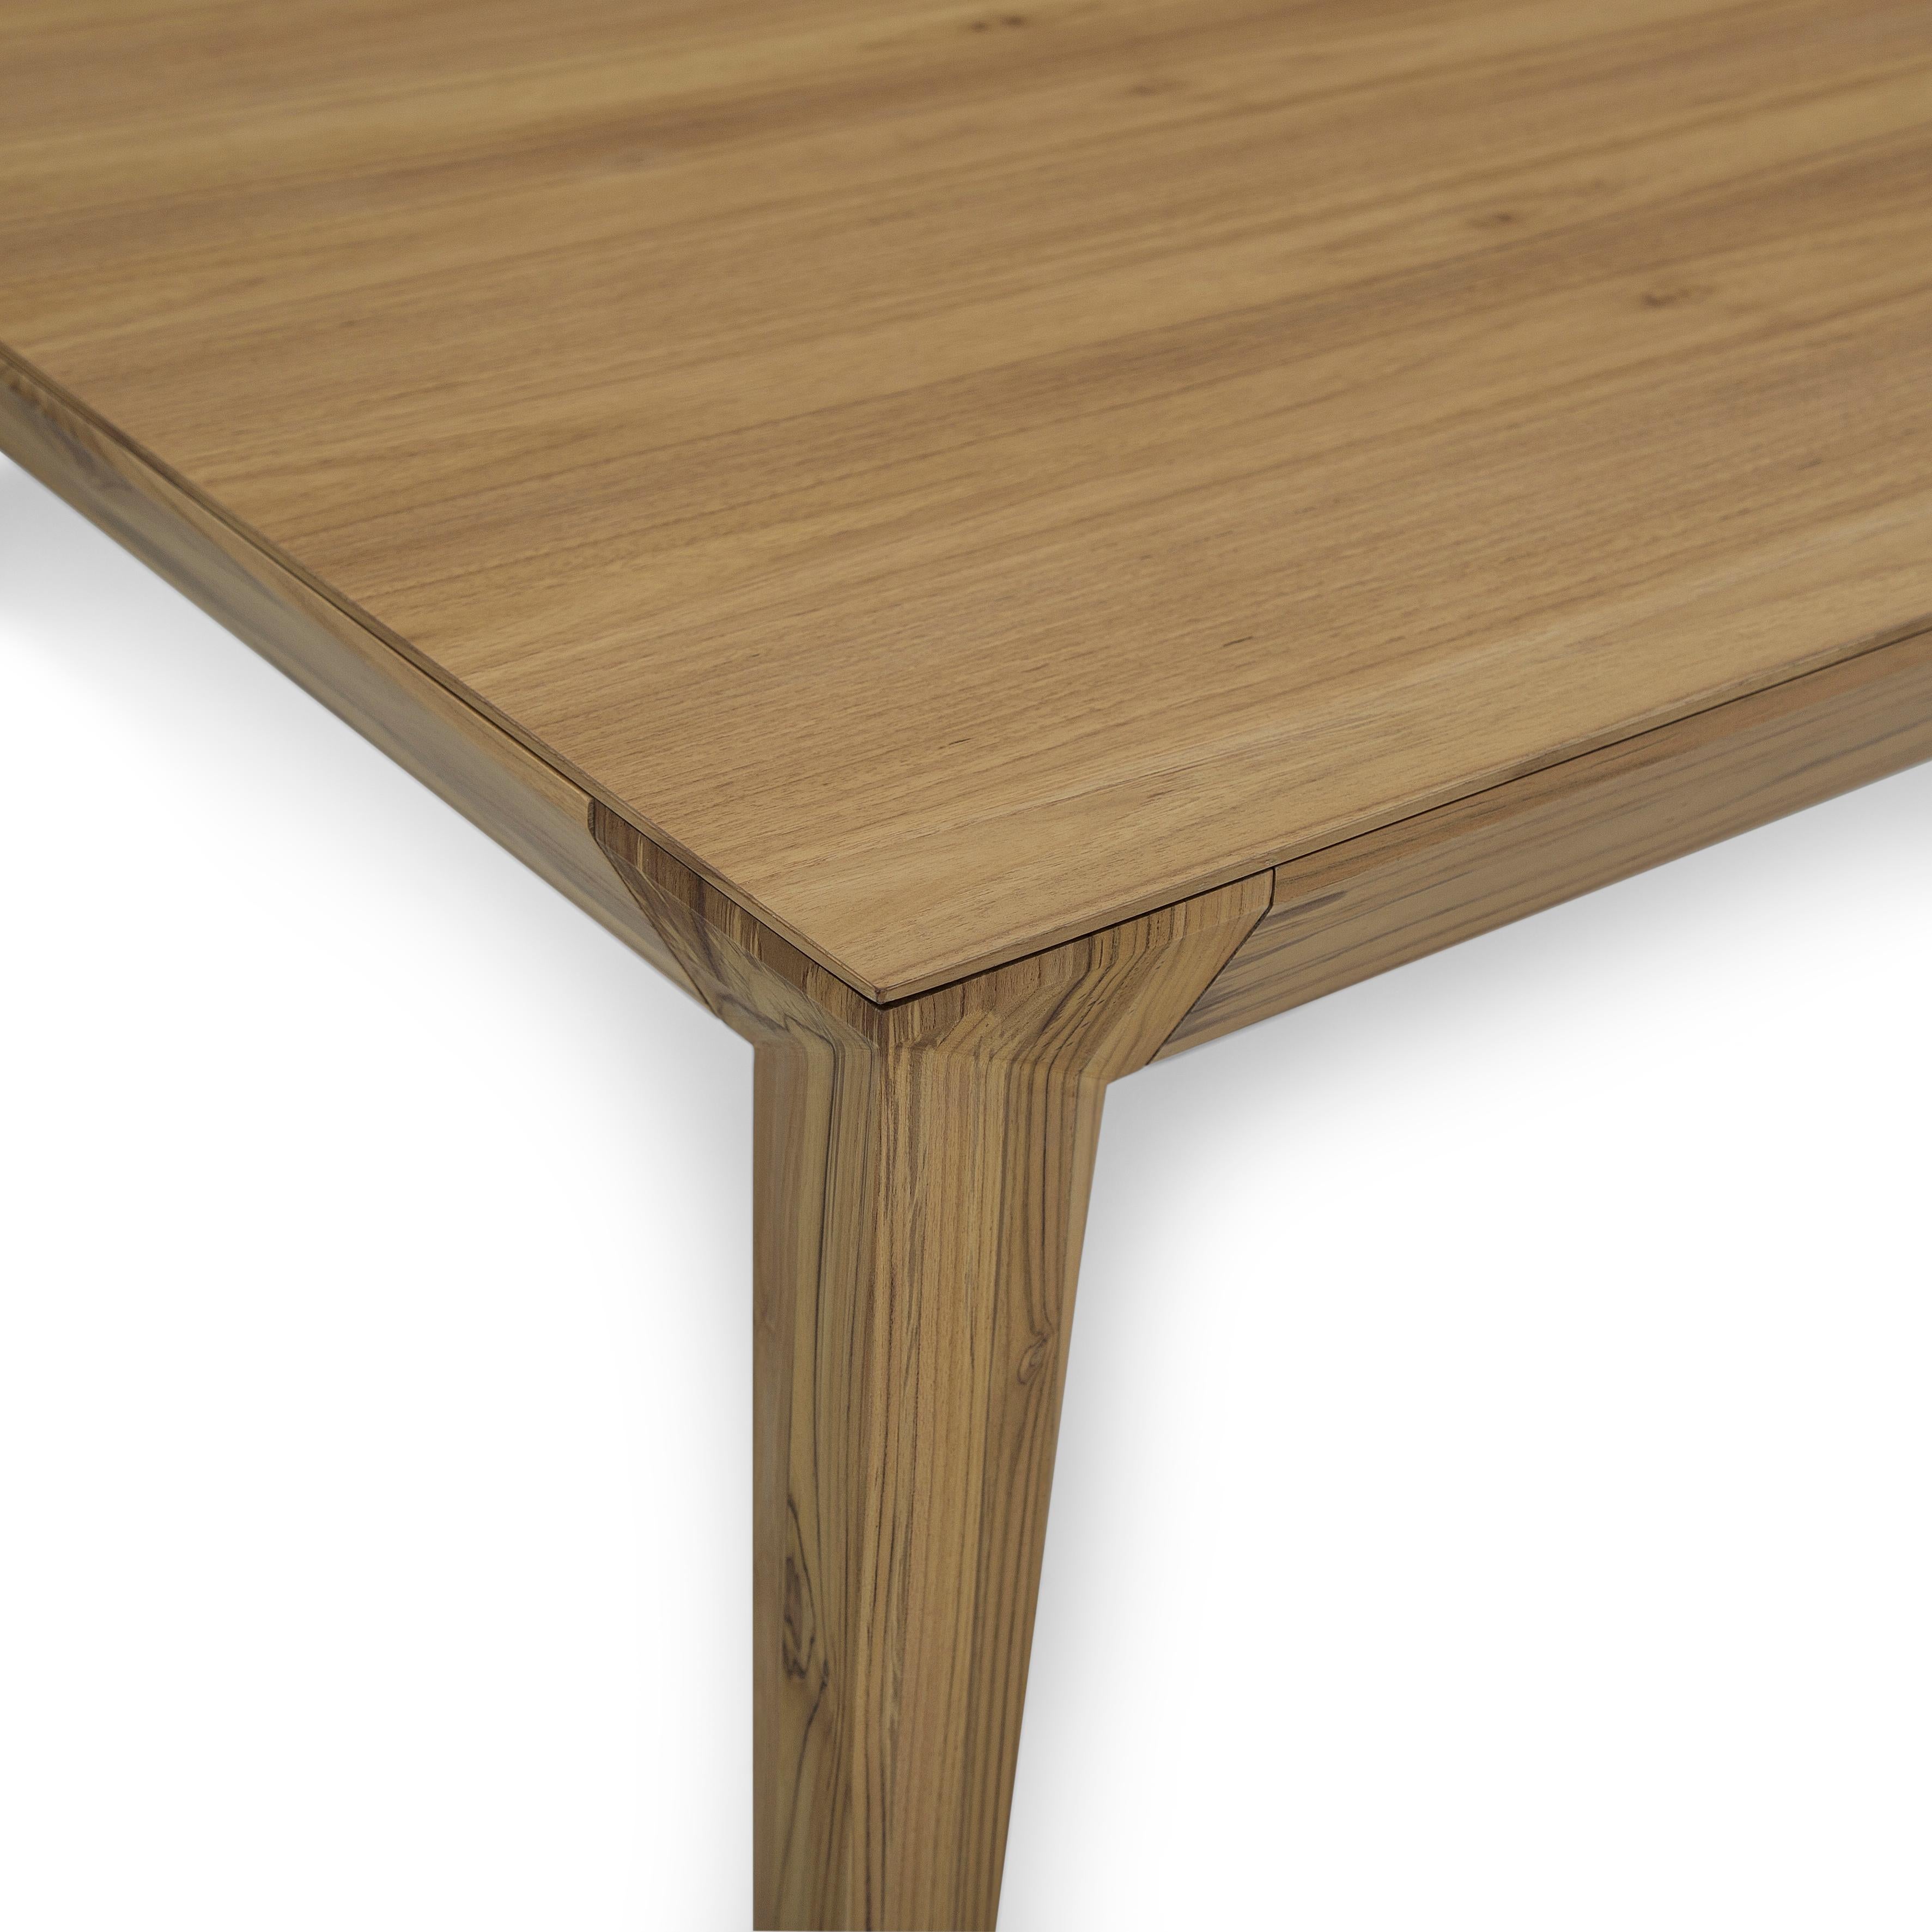 Luce Rectangular Dining Table with a Teak Wood Finish Veneered Table Top 95'' For Sale 1